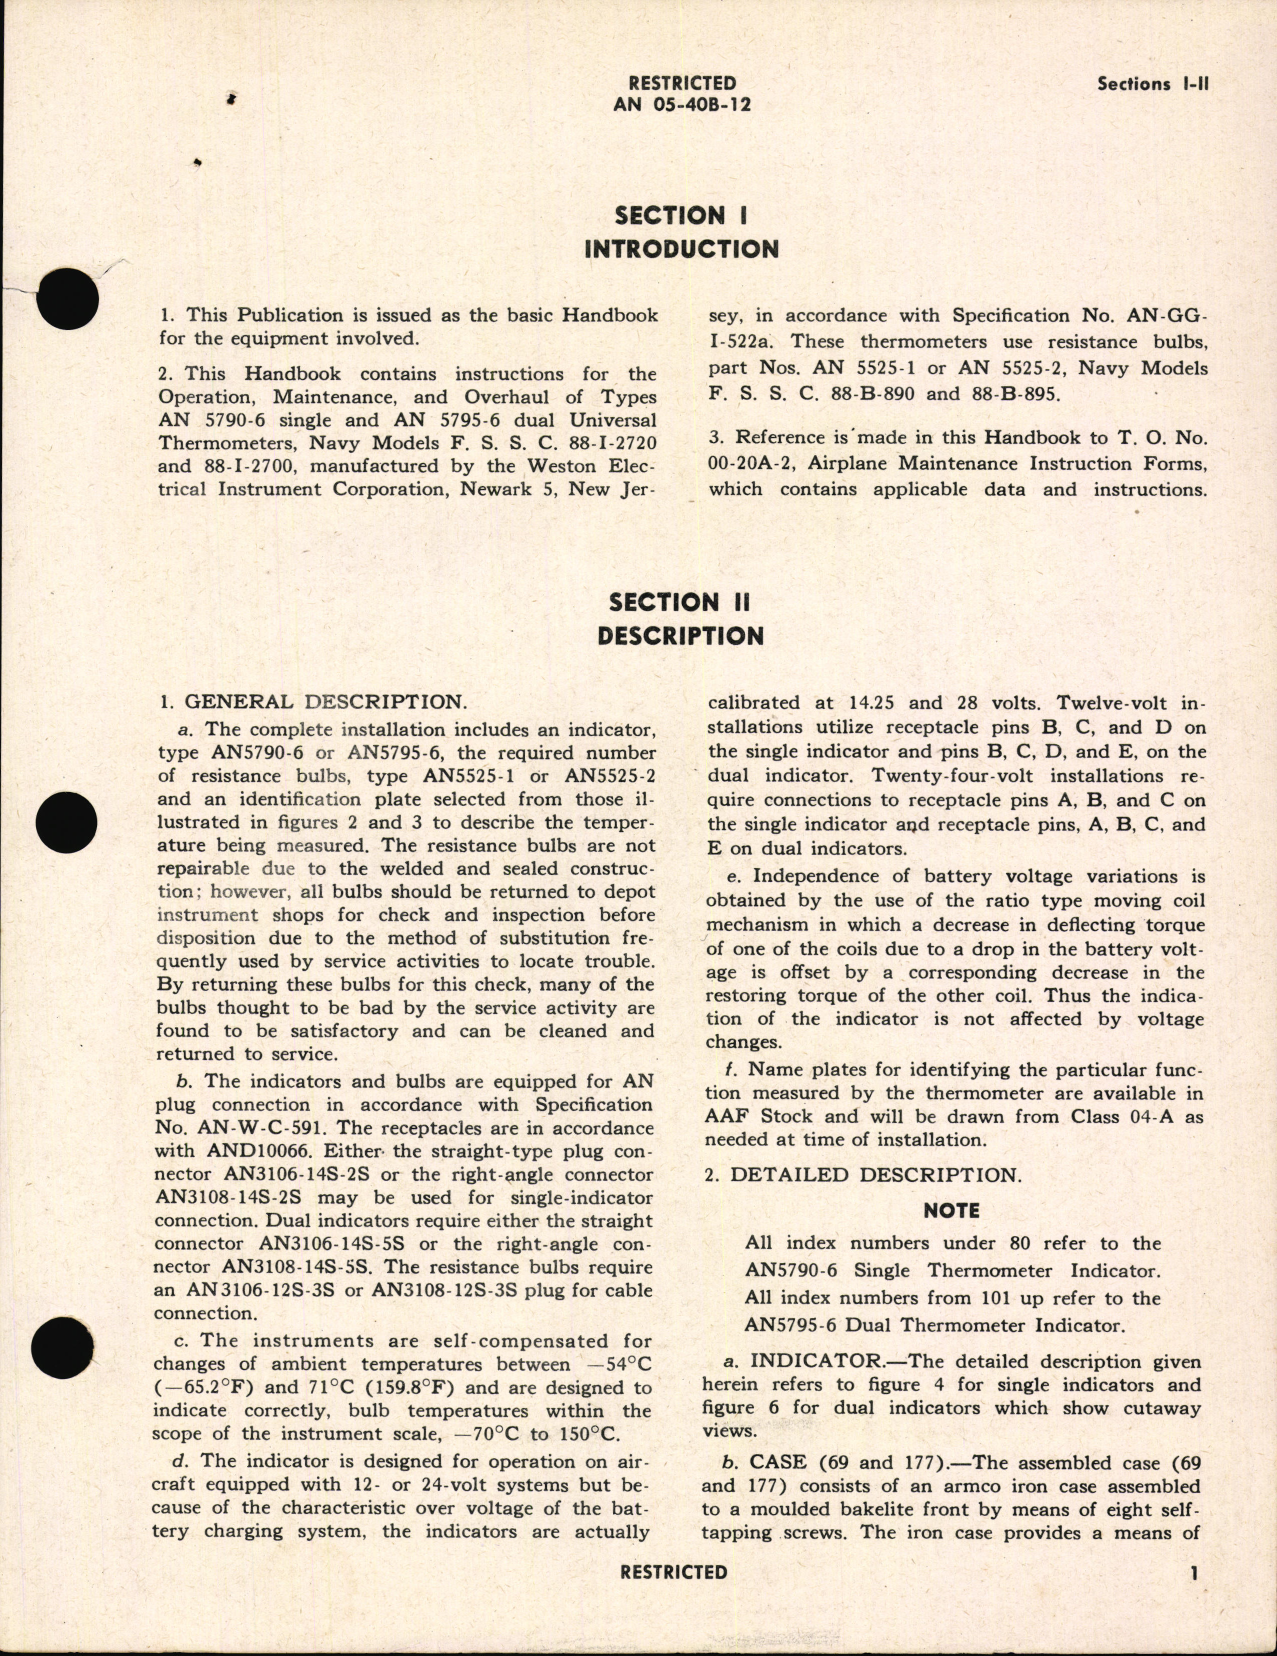 Sample page 7 from AirCorps Library document: Handbook of Instructions with Parts Catalog for Thermometer Indicators